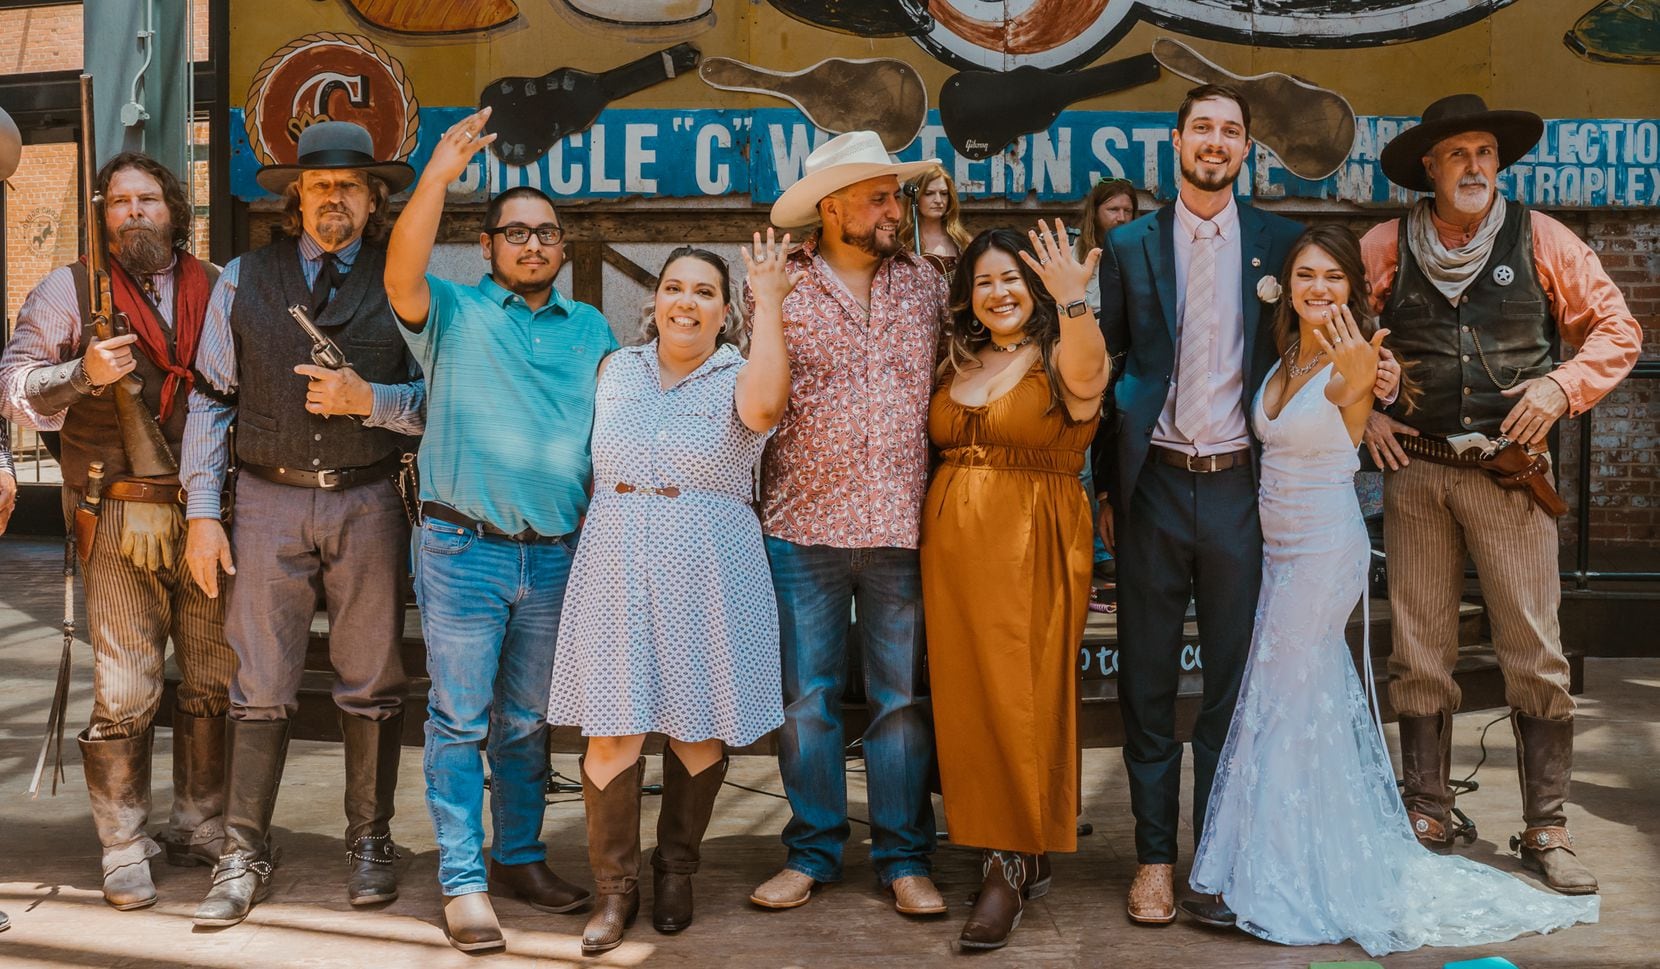 Three couples won the opportunity to have a wedding at Second Rodeo Brewing free of charge...